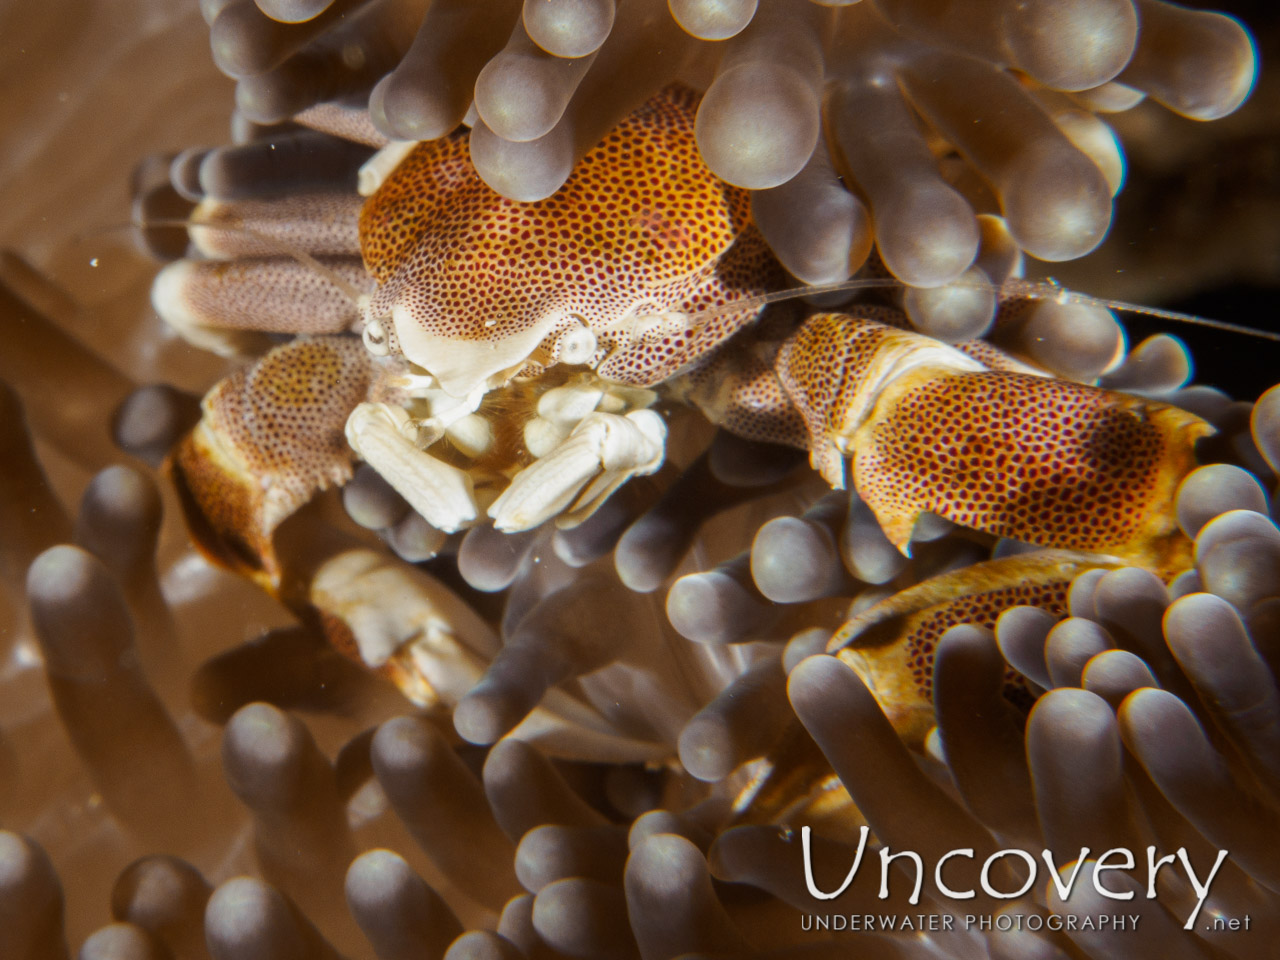 Spotted Porcelain Crab (neopetrolisthes Maculatus), photo taken in Maldives, Male Atoll, South Male Atoll, Vadhoo Caves